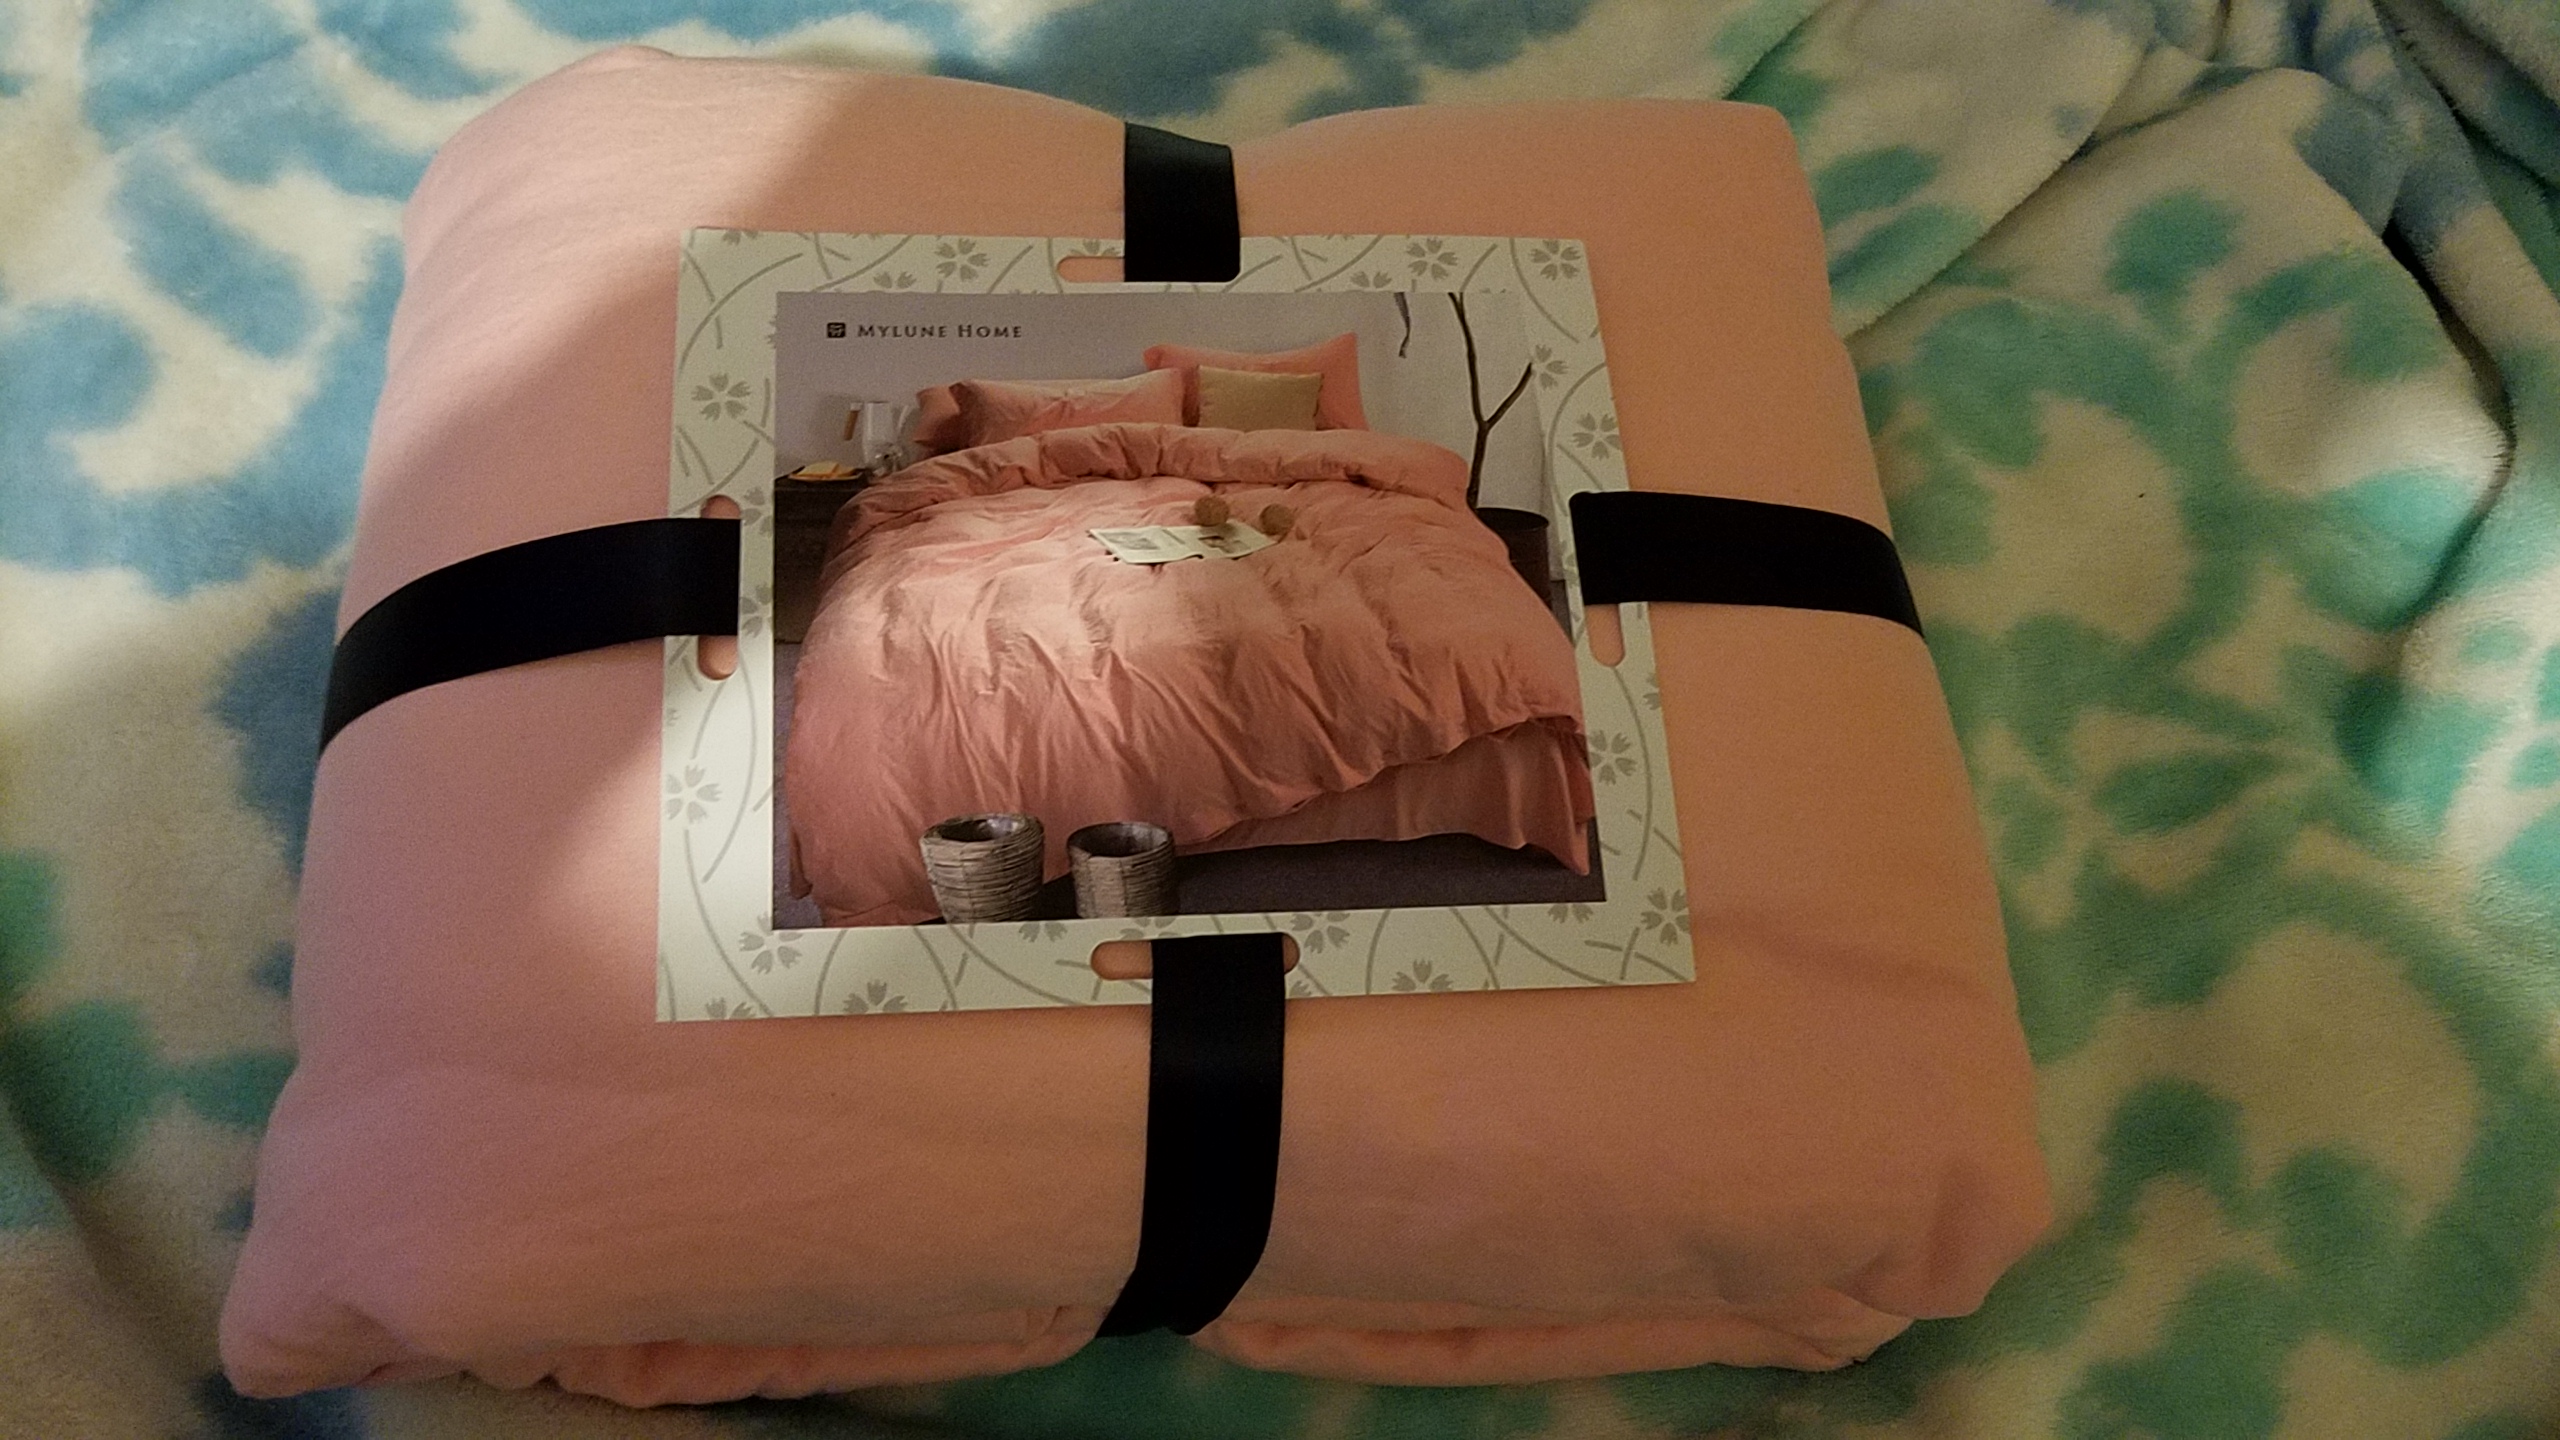 Very soft... love the "radiant" pink color... excellent gift!